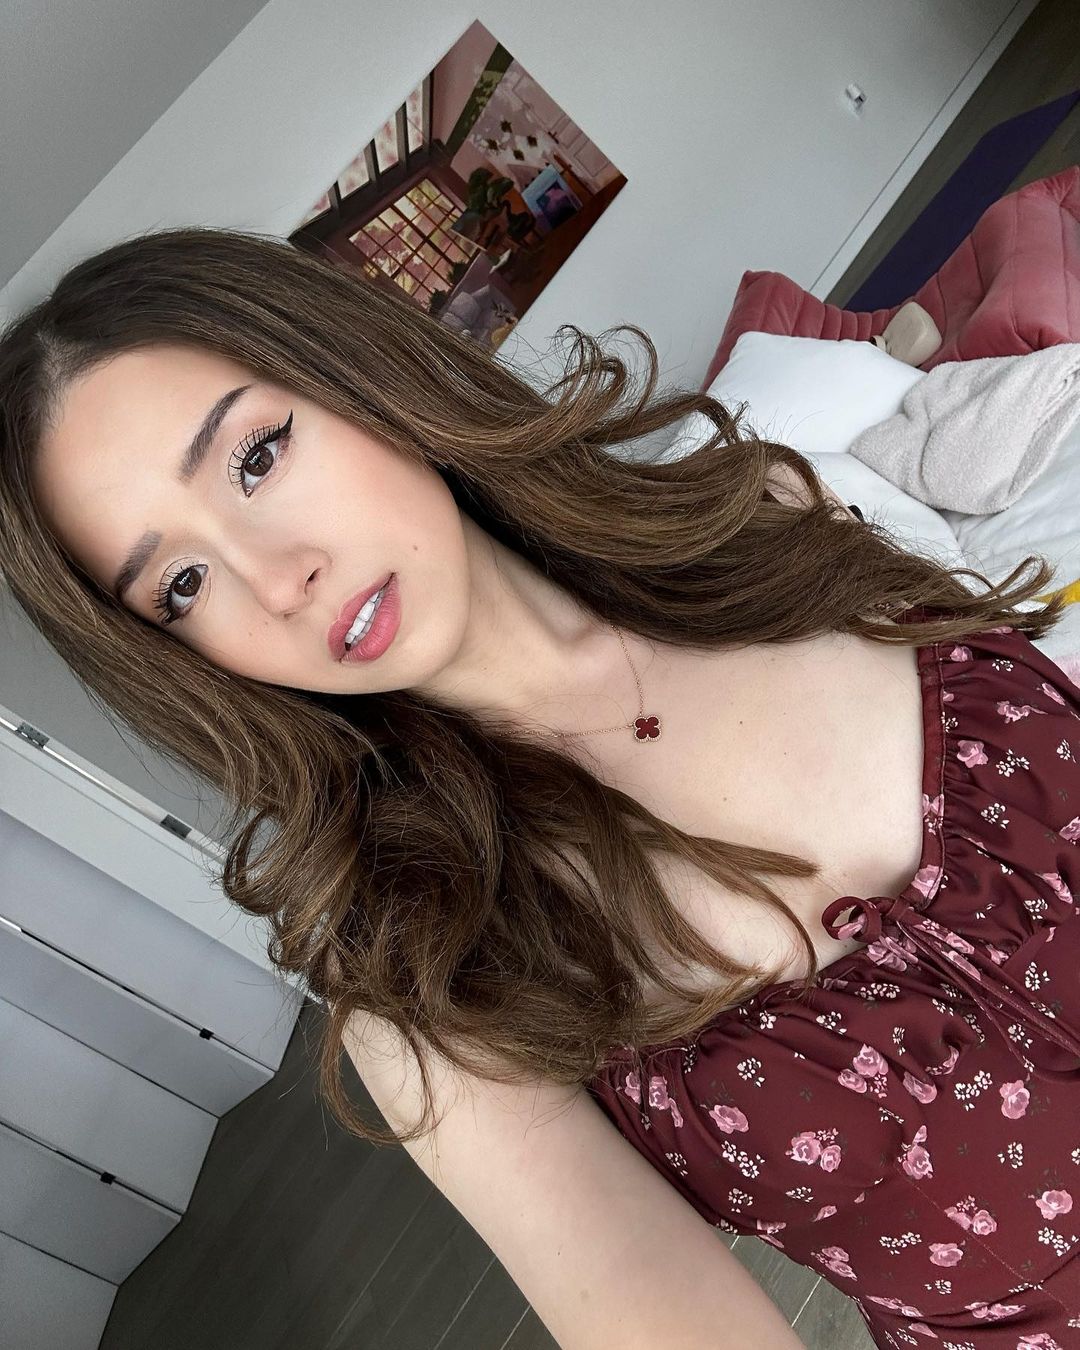 Twitch's Atrioc Caught Looking at NSFW Deepfakes of Pokimane and